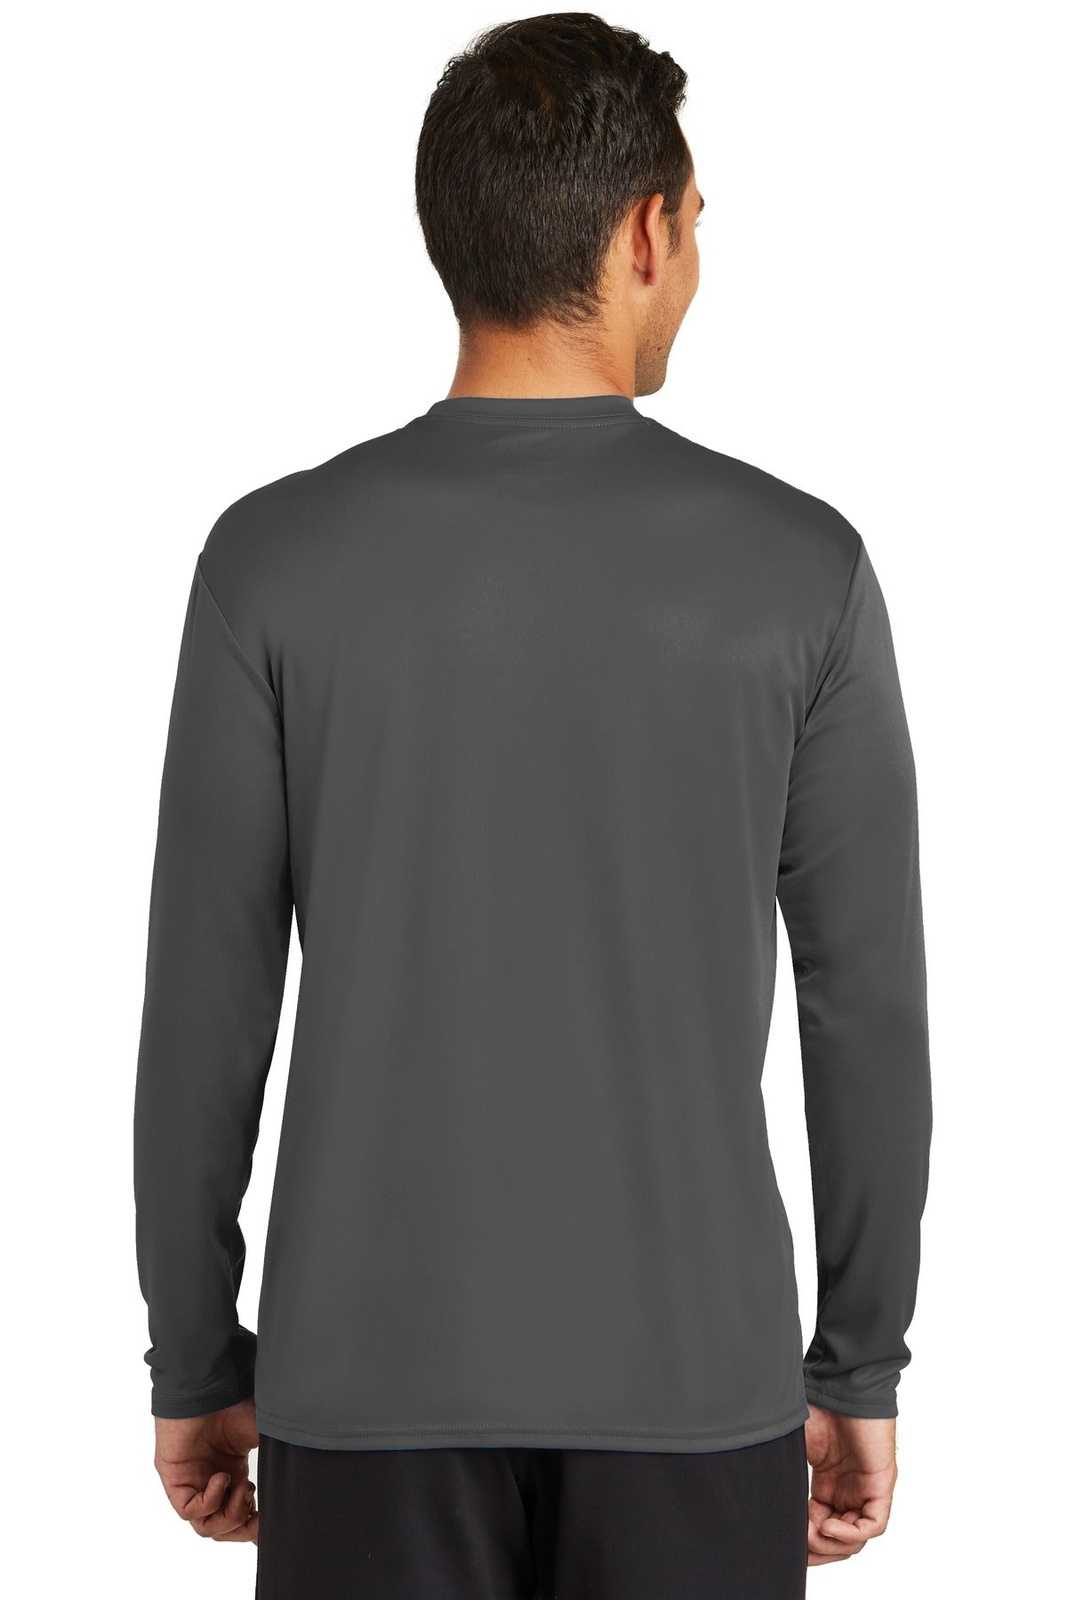 Port &amp; Company PC380LS Long Sleeve Performance Tee - Charcoal - HIT a Double - 2